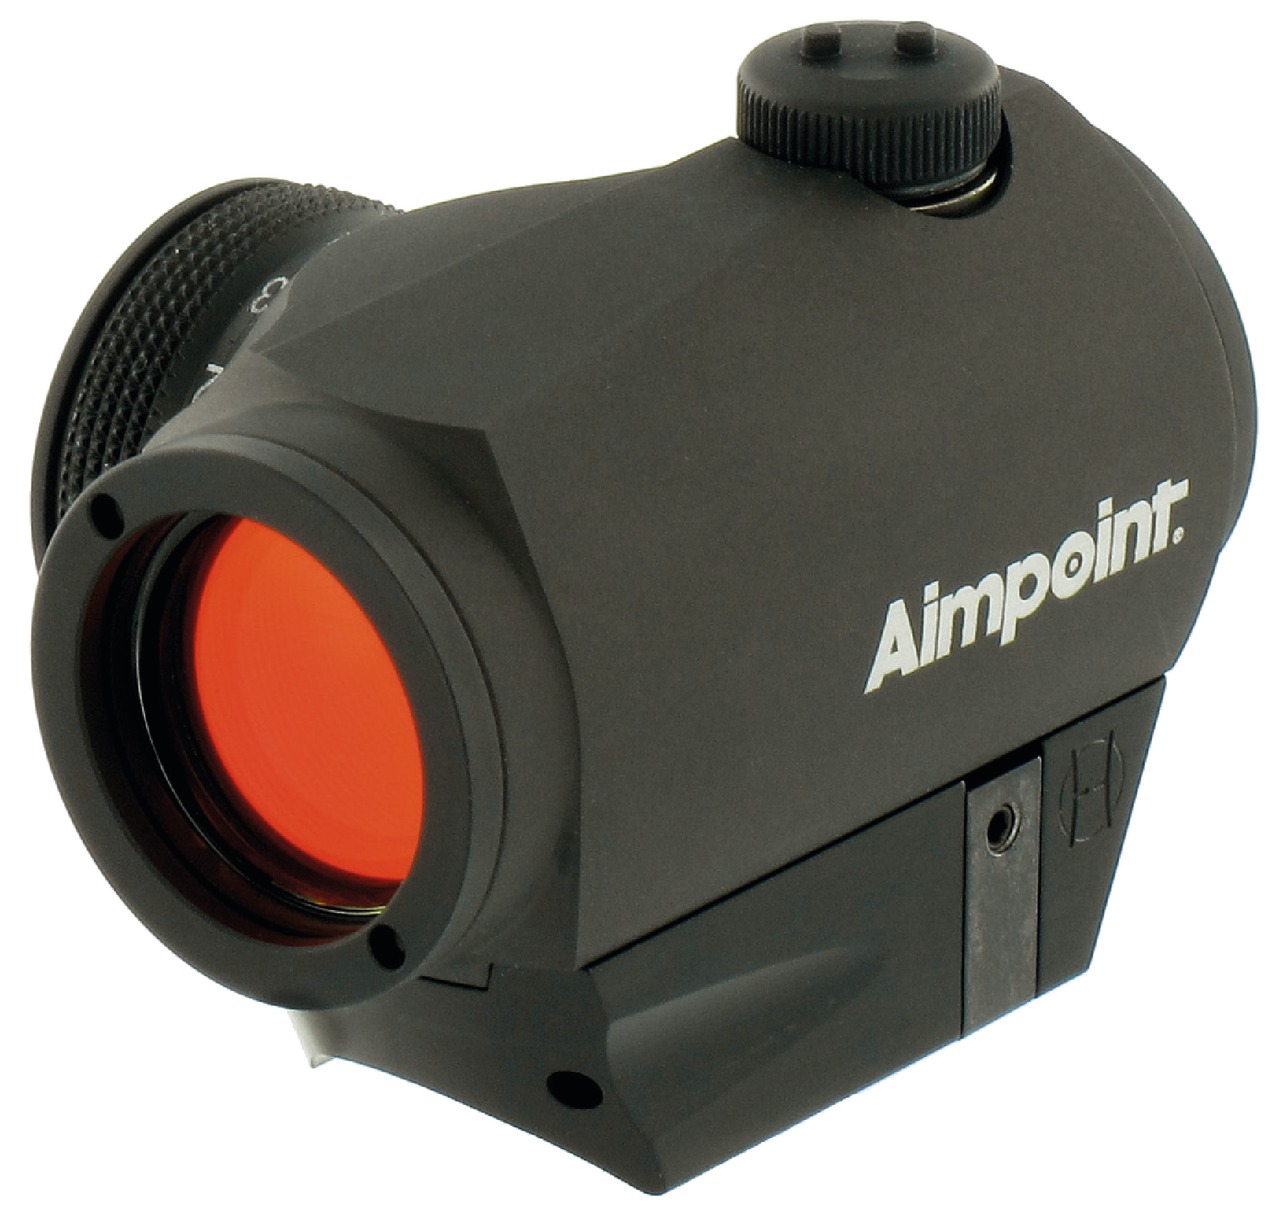 EMBASE AIMPOINT CARABINE RUGER 10/22 Aimpoint